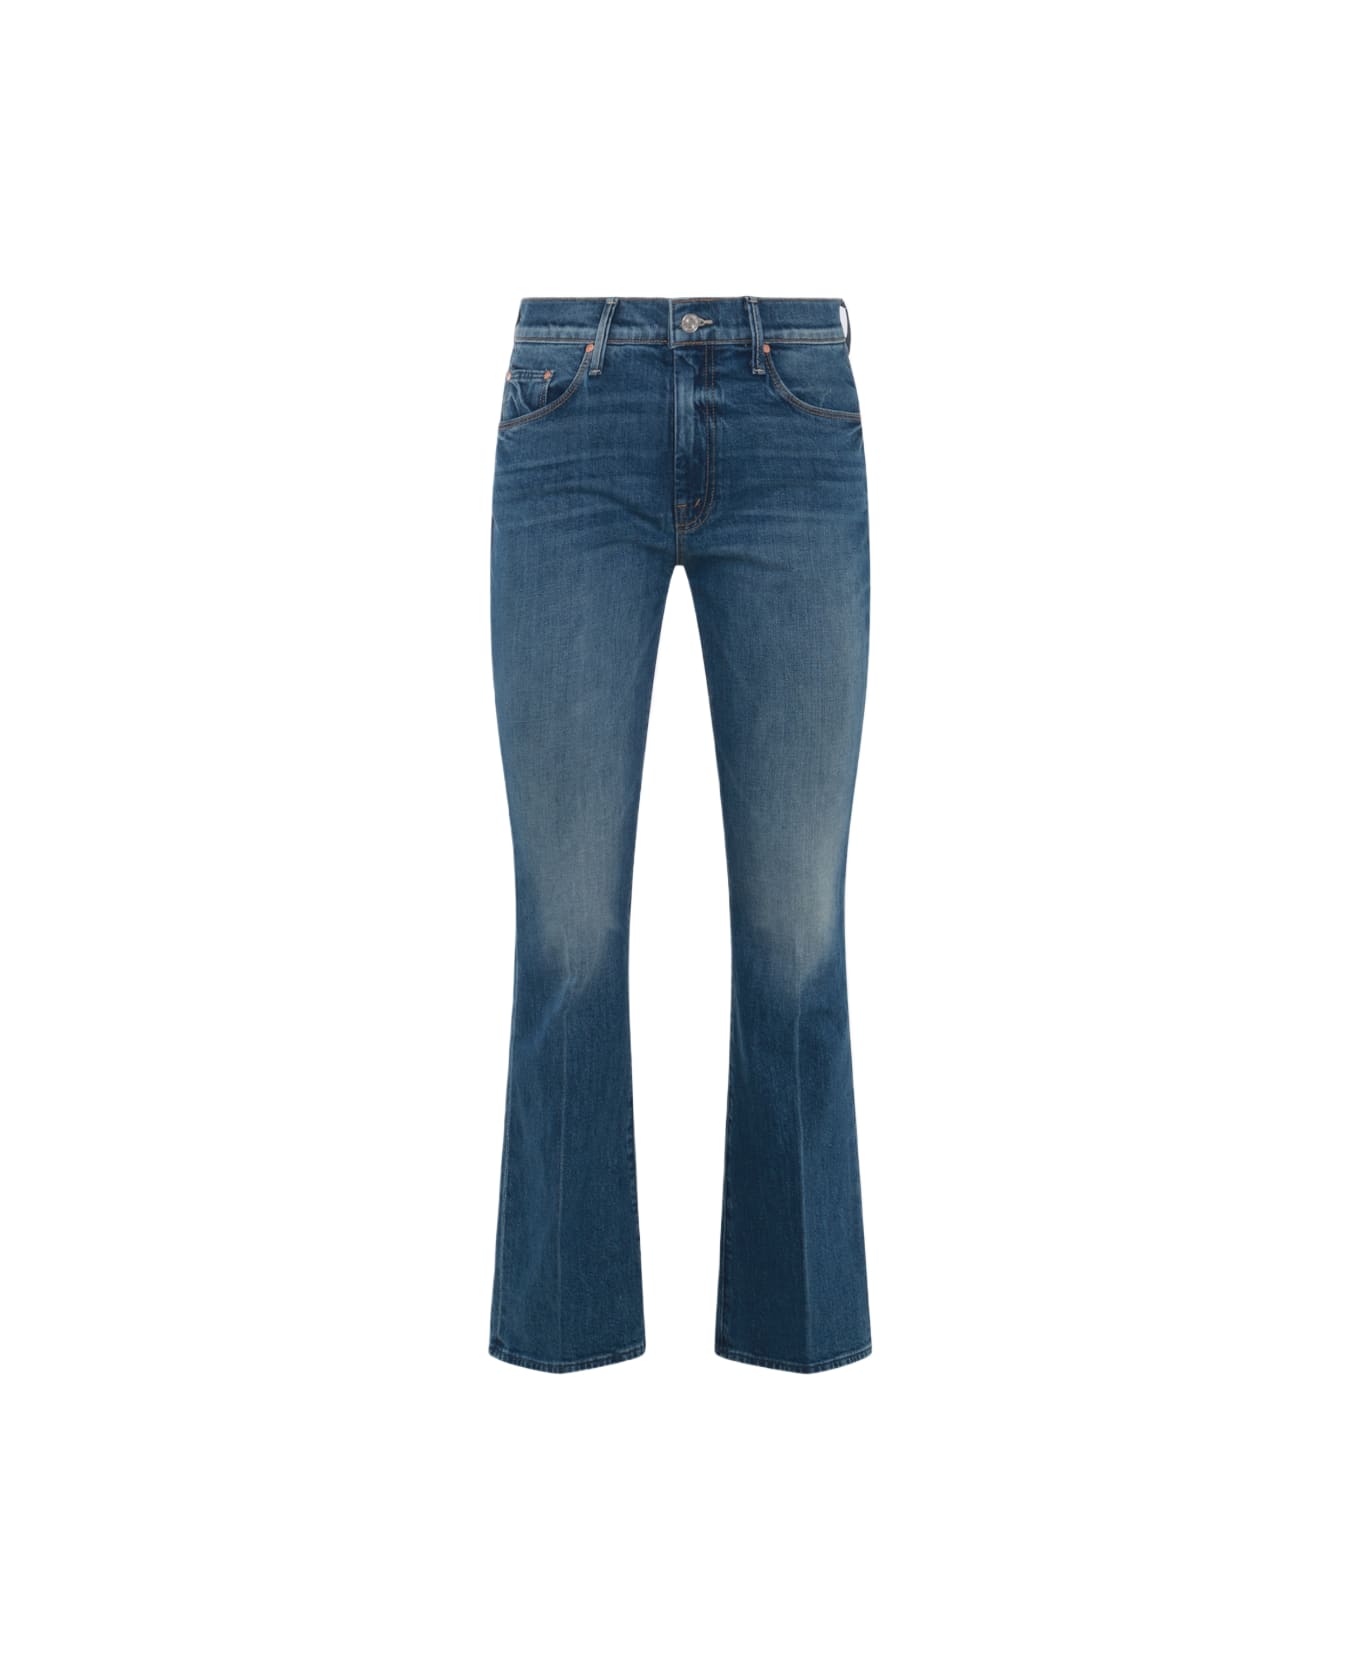 Mother Navy Blue Cotton Blend Jeans - ITS A SMALL WORLD デニム